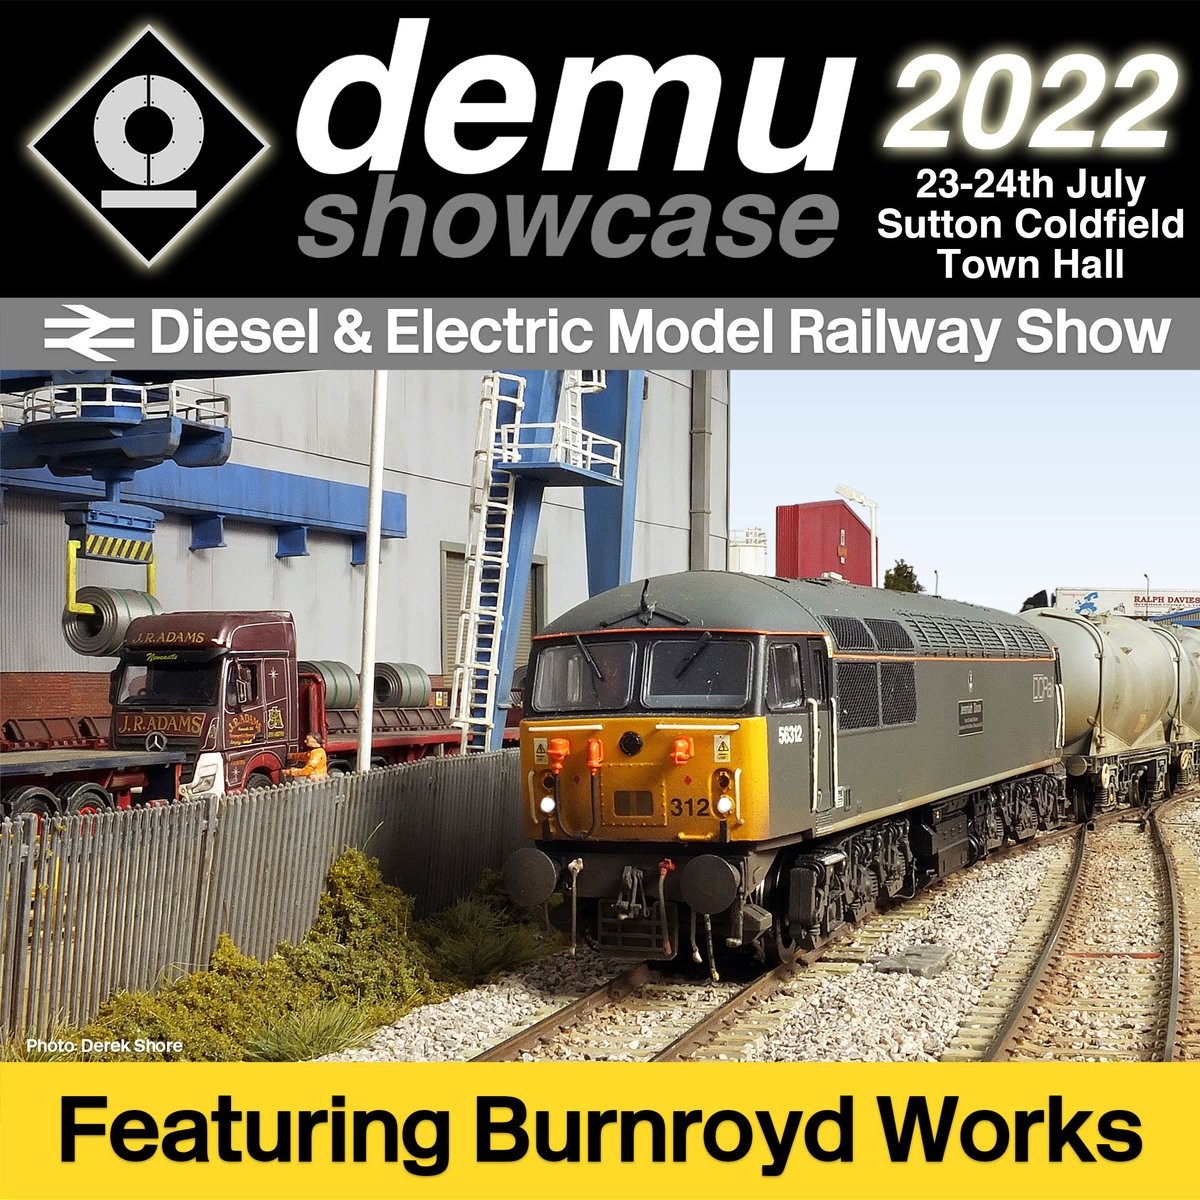 Another taster of one the fab layouts that will be appearing at Showcase 2022. Burnroyd Works OO Gauge by Chris Burnage and his take of a contemporary steelworks location. Another mouth watering layout to keep visitors glued to the action.